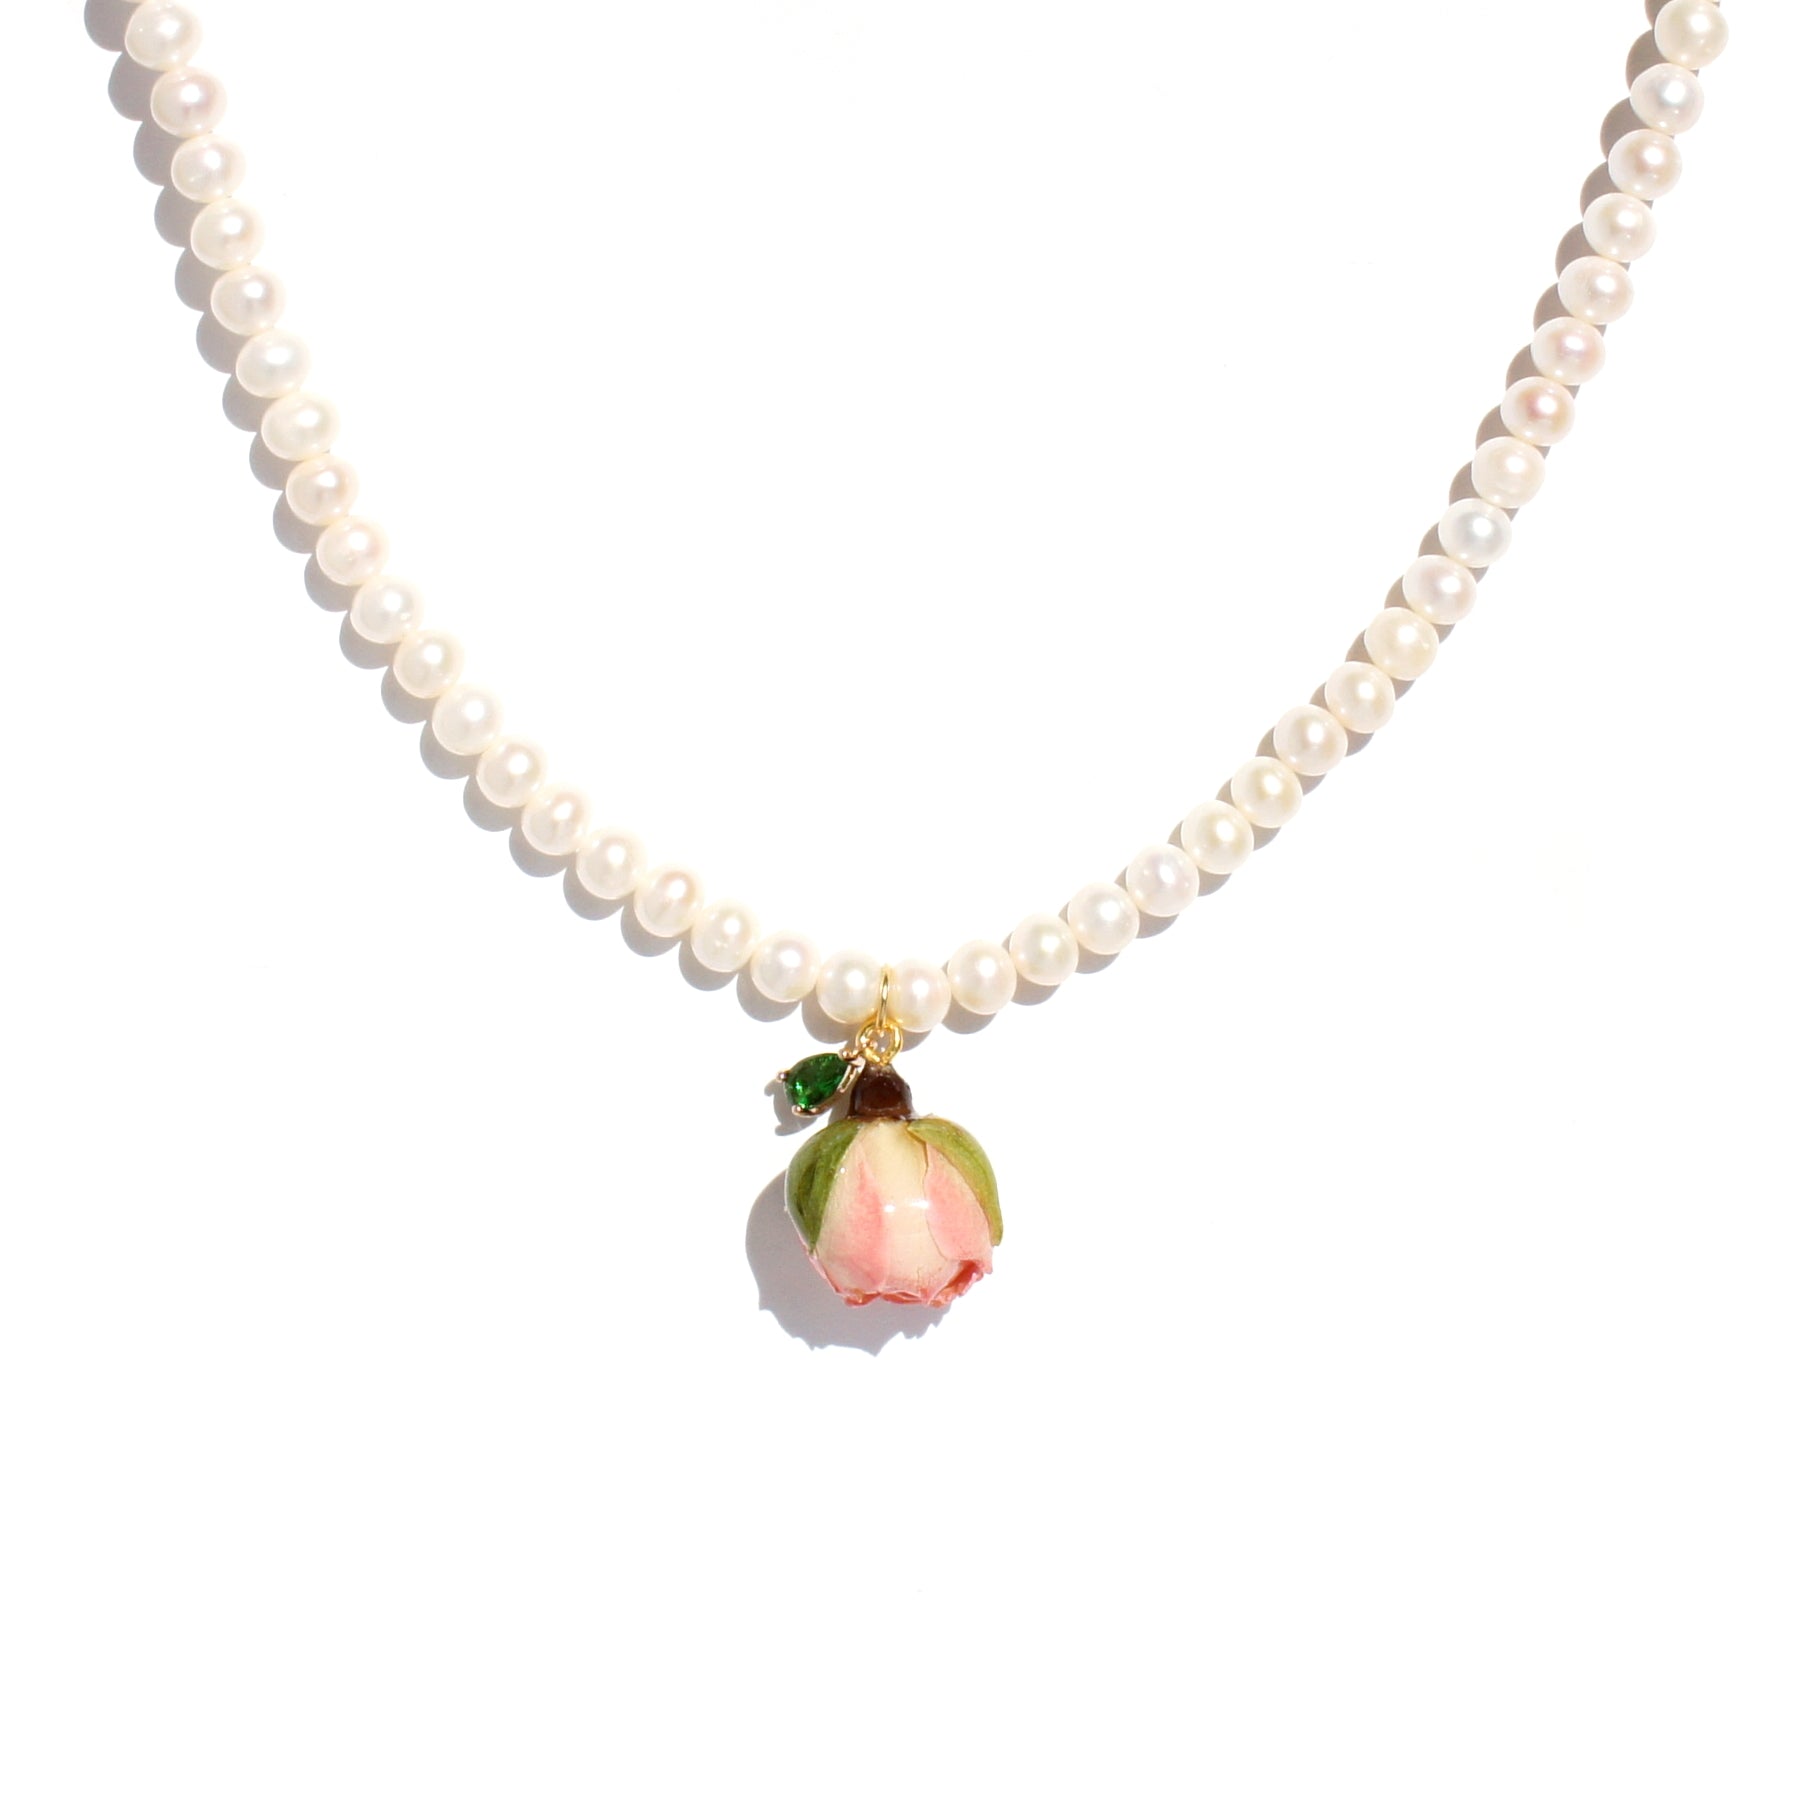 *REAL FLOWER* Bella Rosa Rosebud and Freshwater Pearl Necklace with Green Crystal